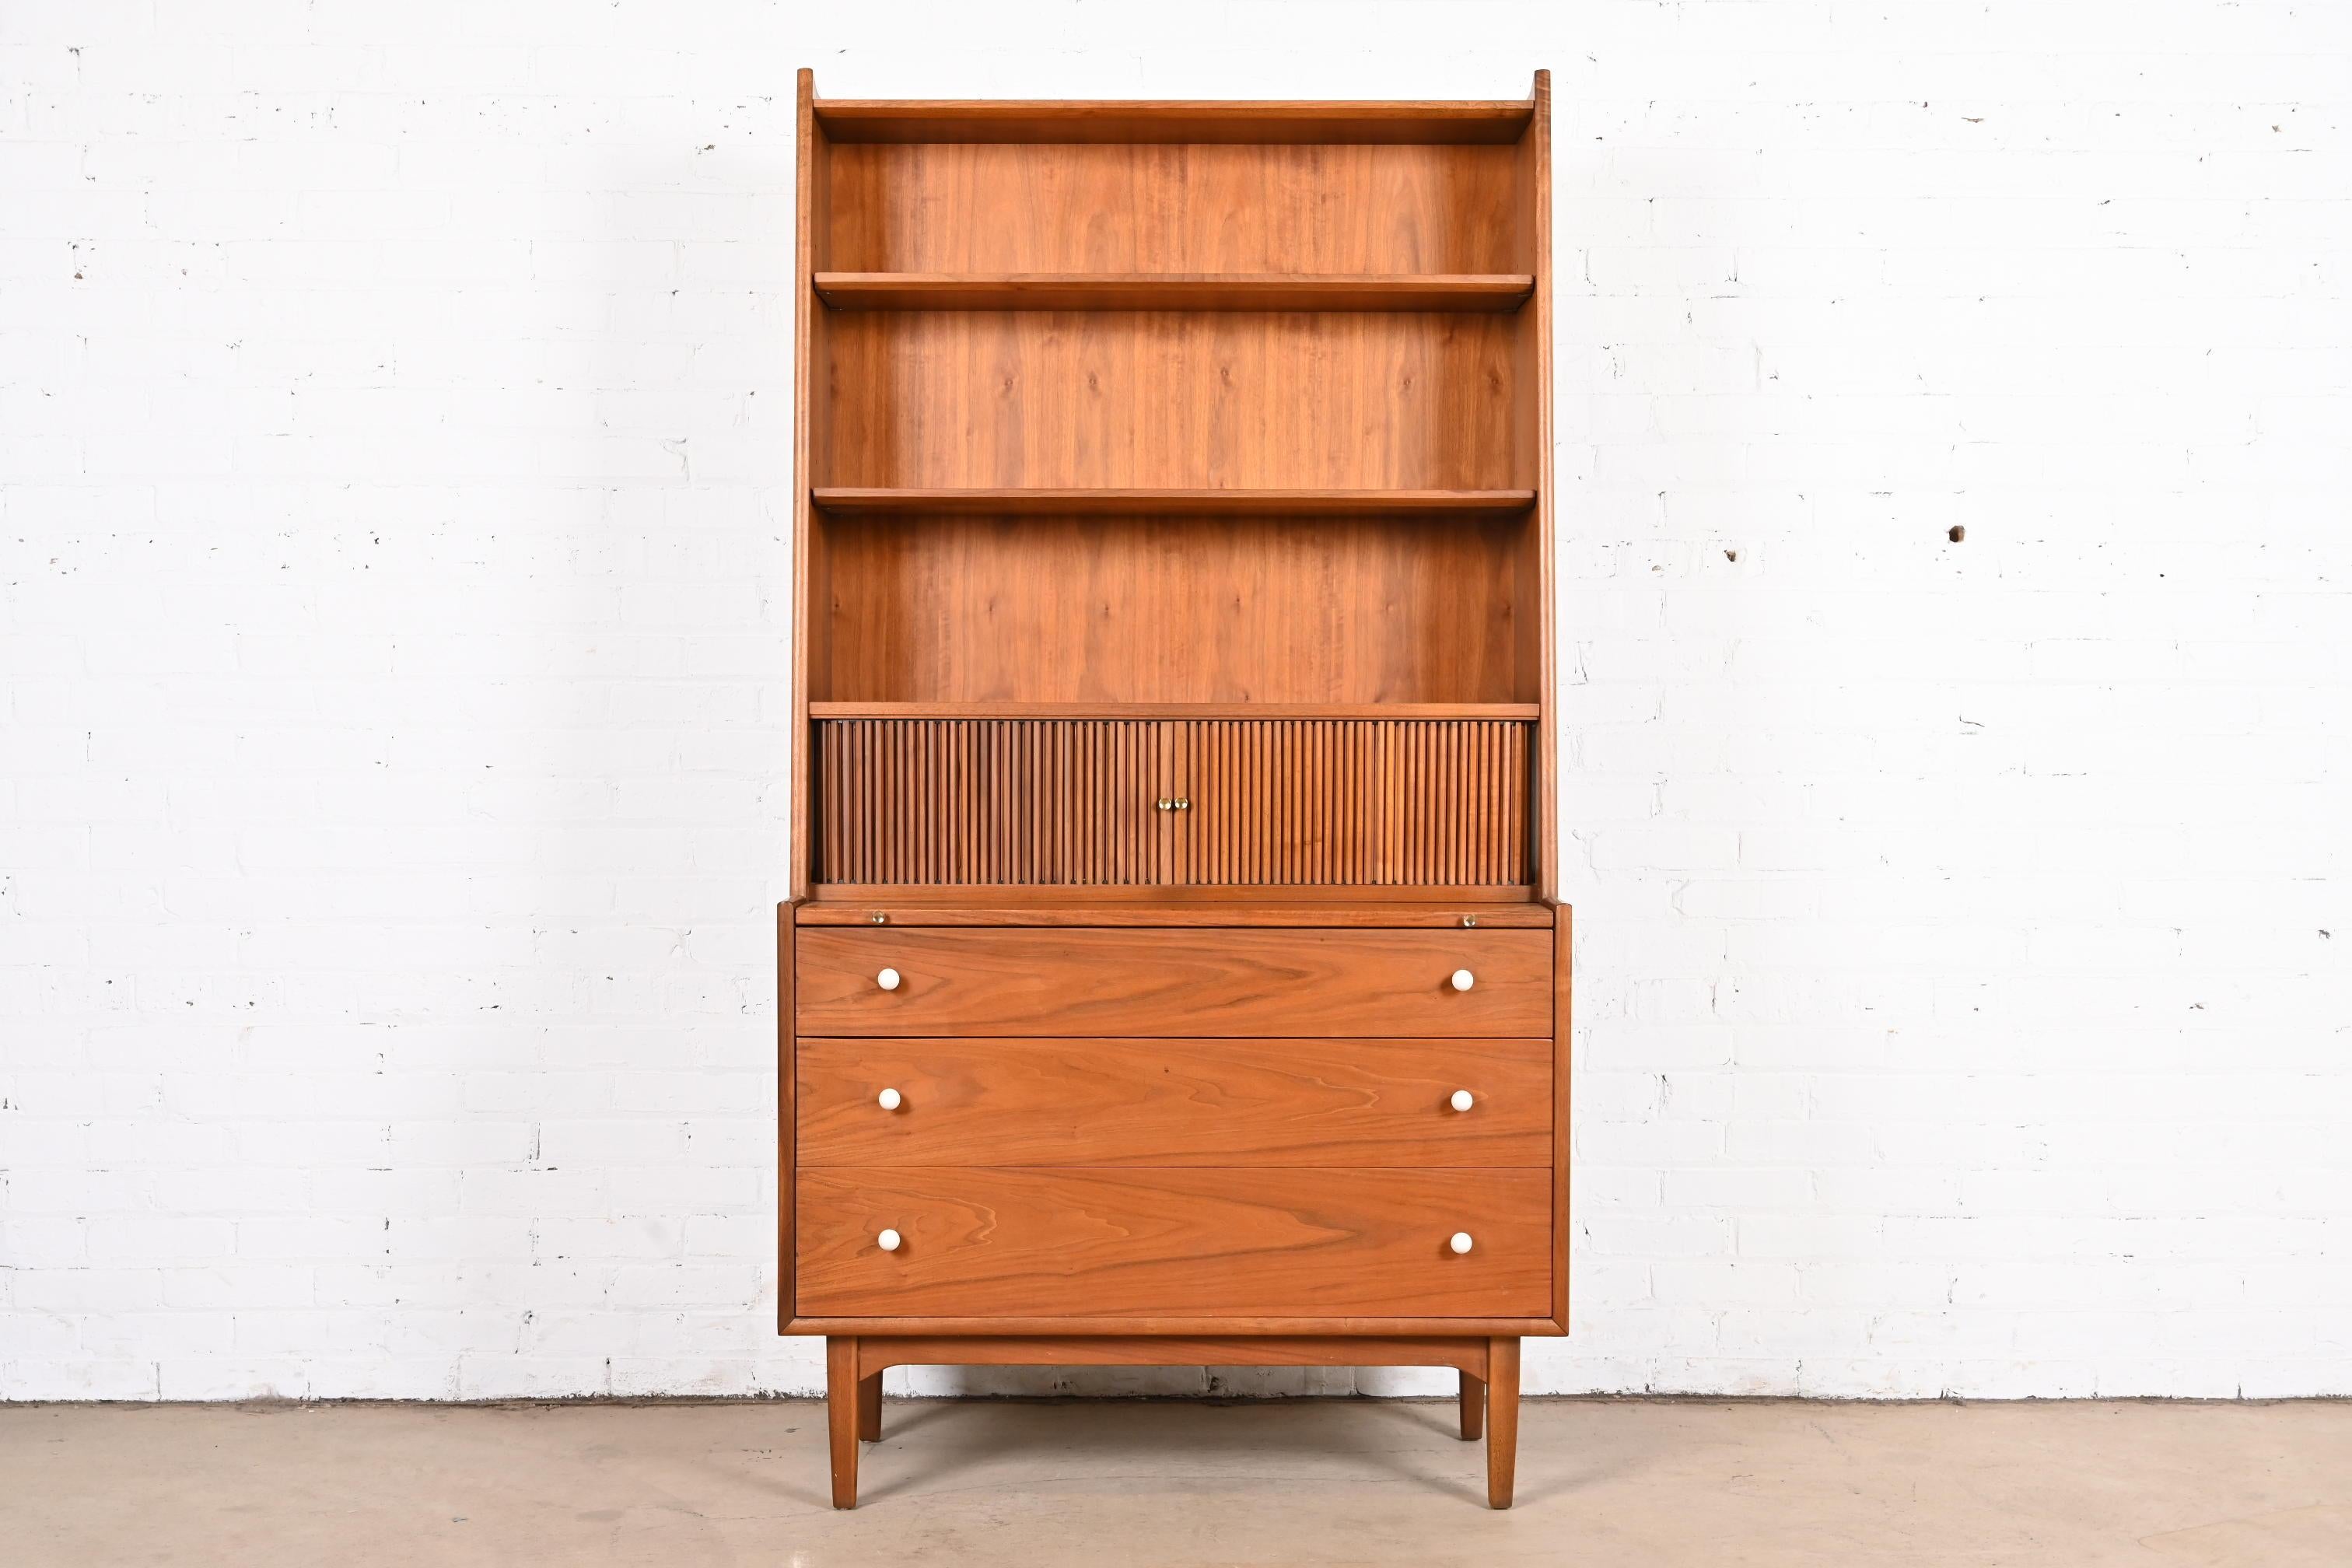 An exceptional Mid-Century Modern bureau with tambour door secretary desk and bookcase
By Kipp Stewart for Drexel, 